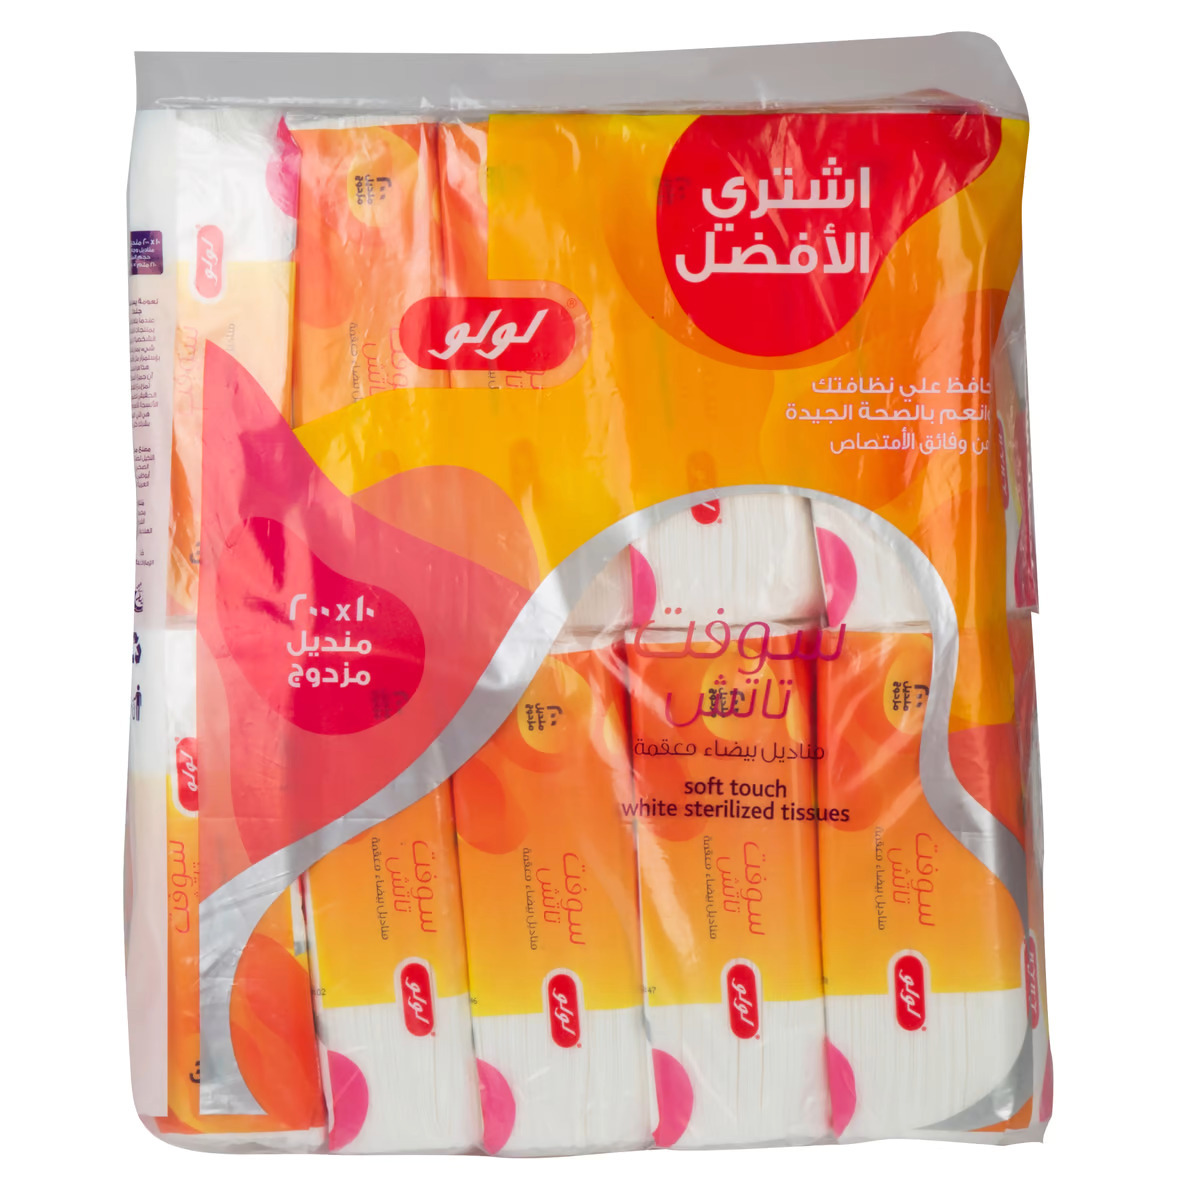 Lulu Softouch Facial Tissue 2 ply  200 Sheets